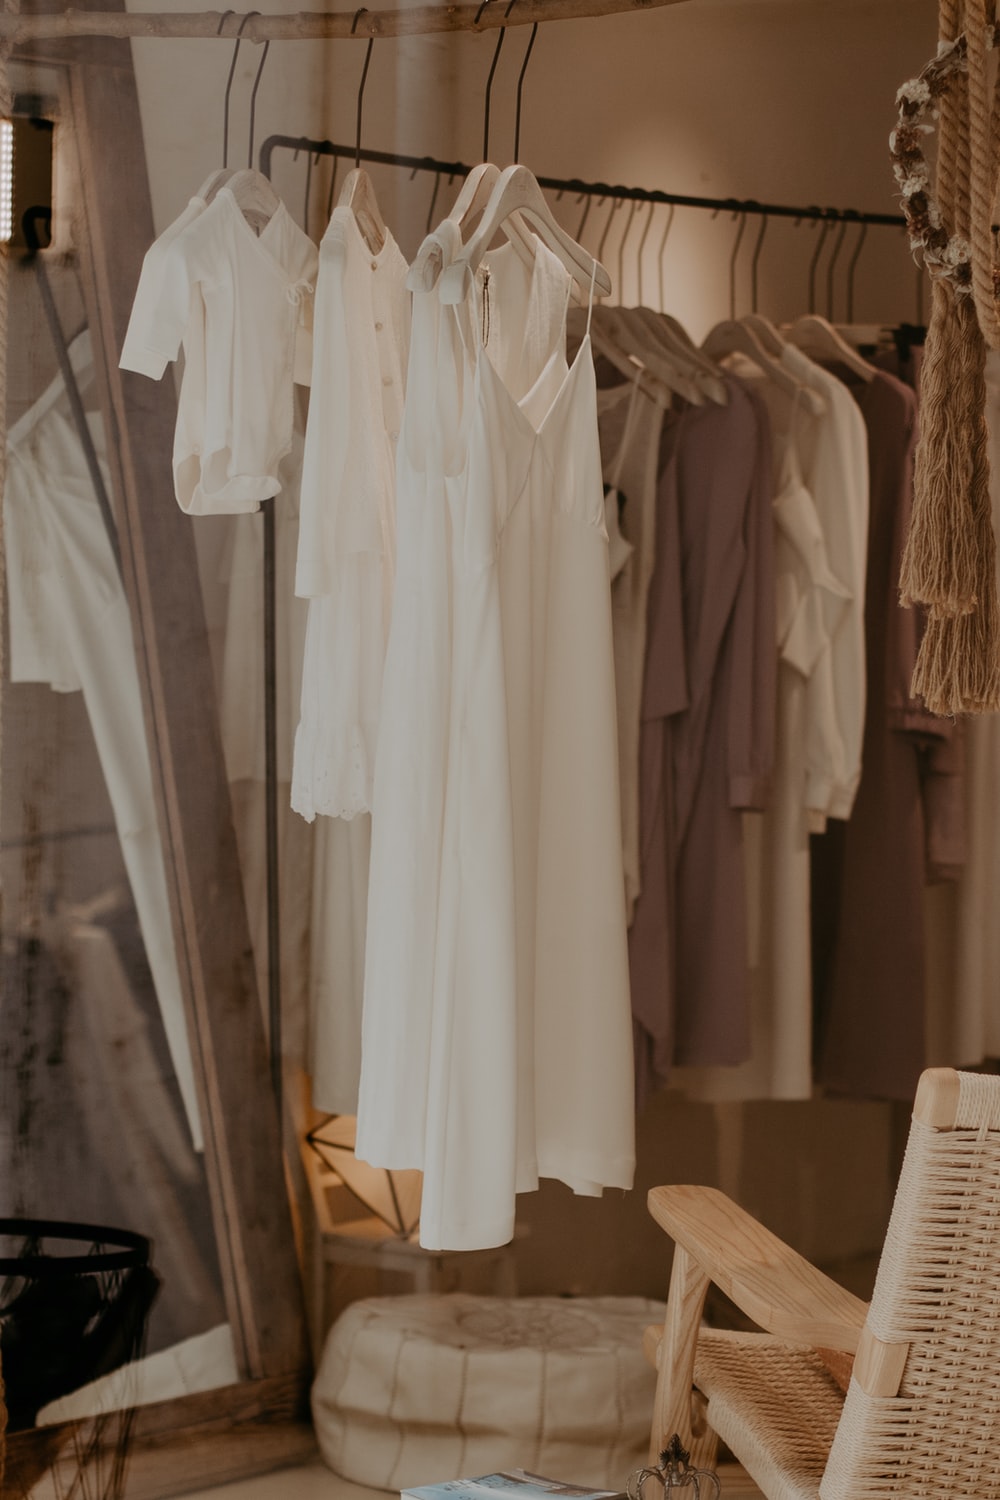 Clothes Shop Picture. Download Free Image